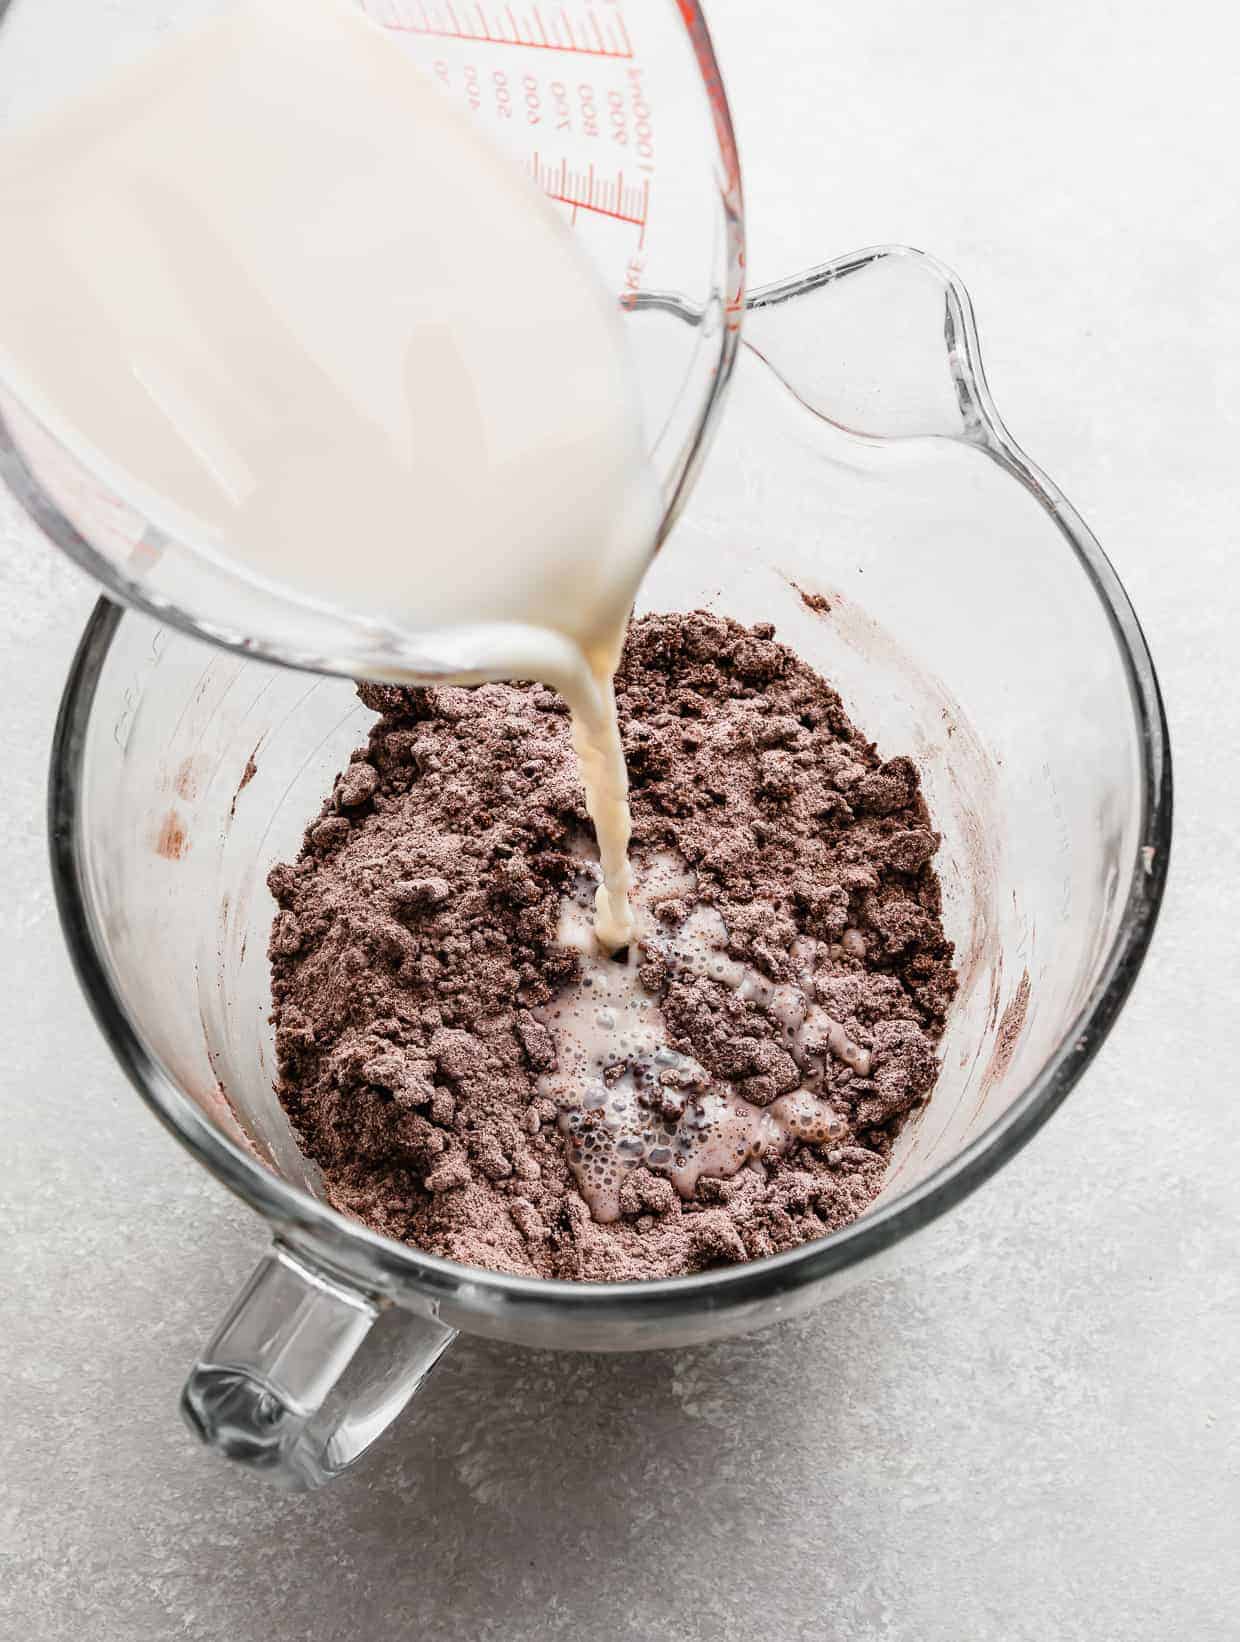 A white liquid being poured into a bowl with chocolate cake dry ingredients.